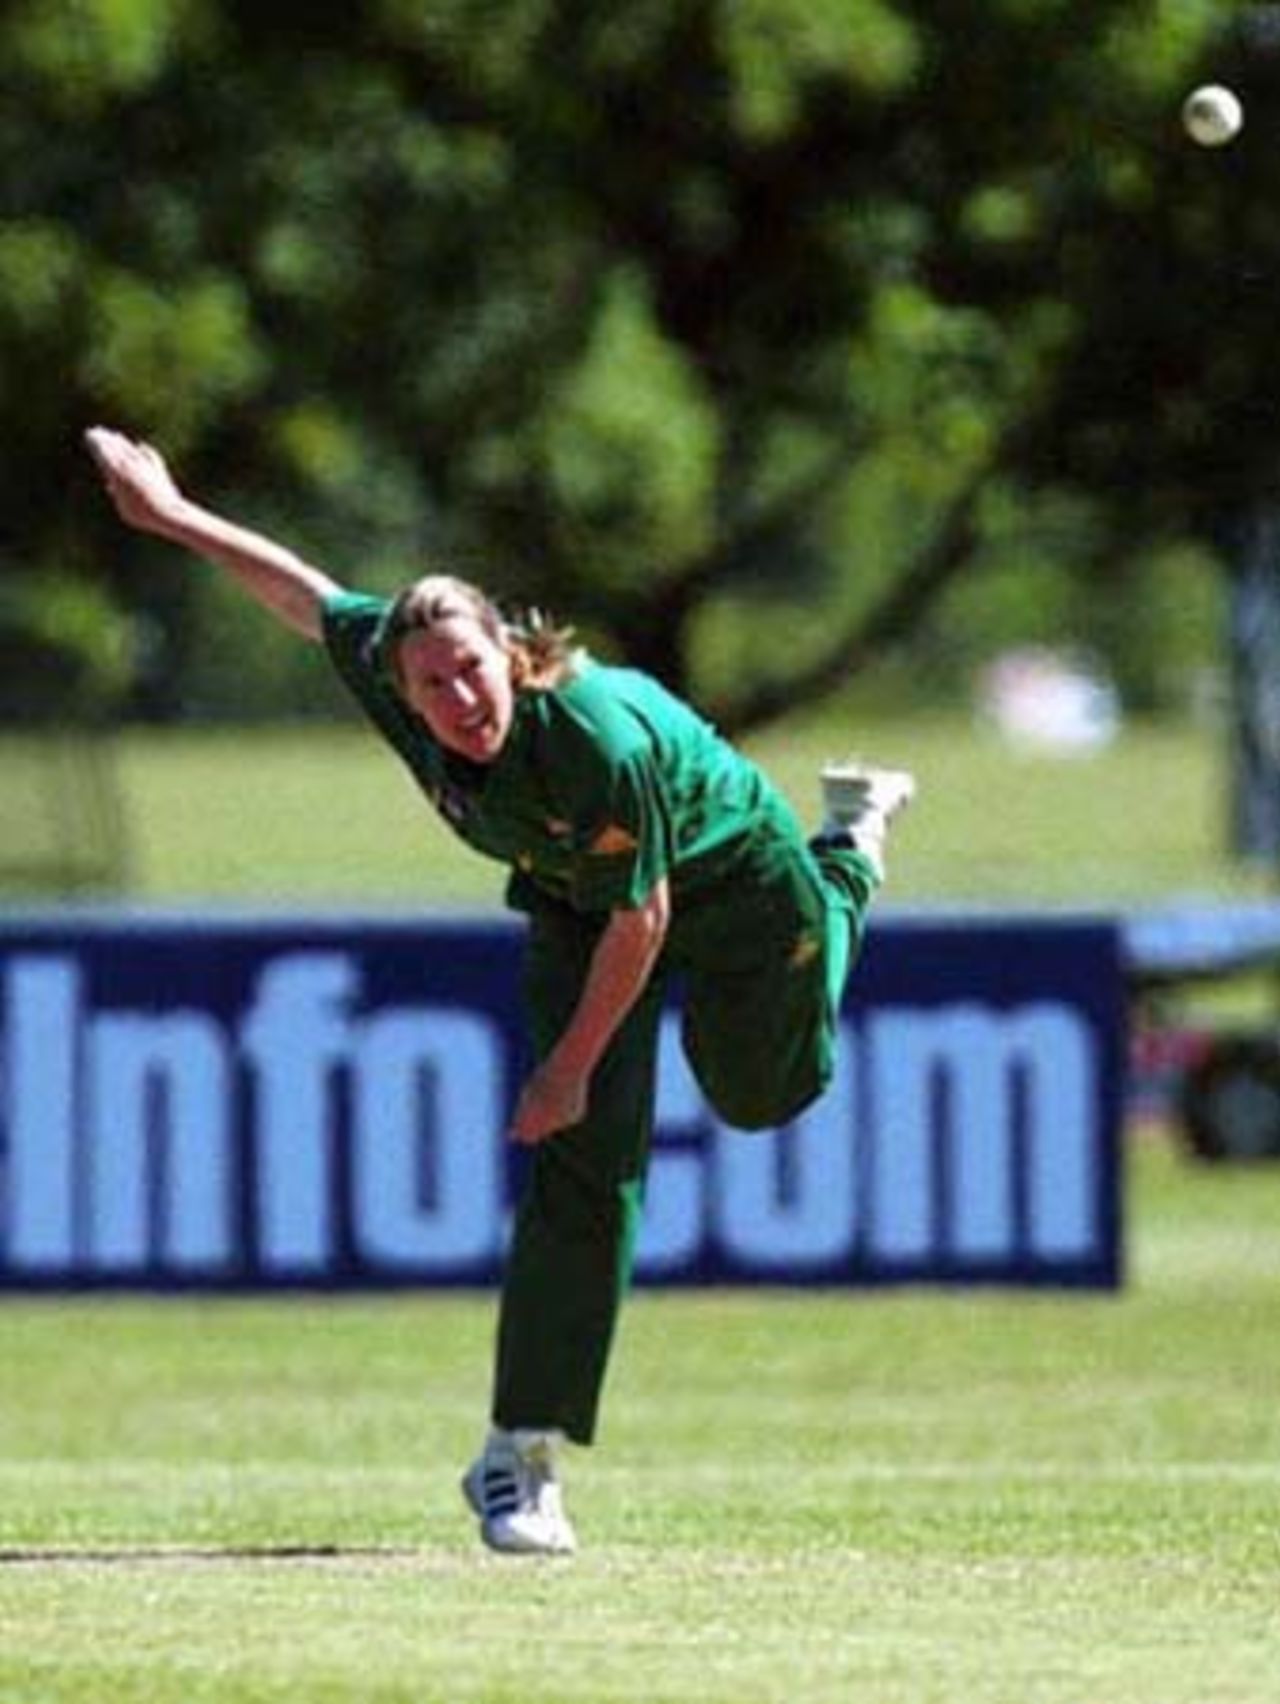 India v South Africa at the CricInfo Women's World Cup 2000, played in New Zealand at the Hagley Oval Christchurch